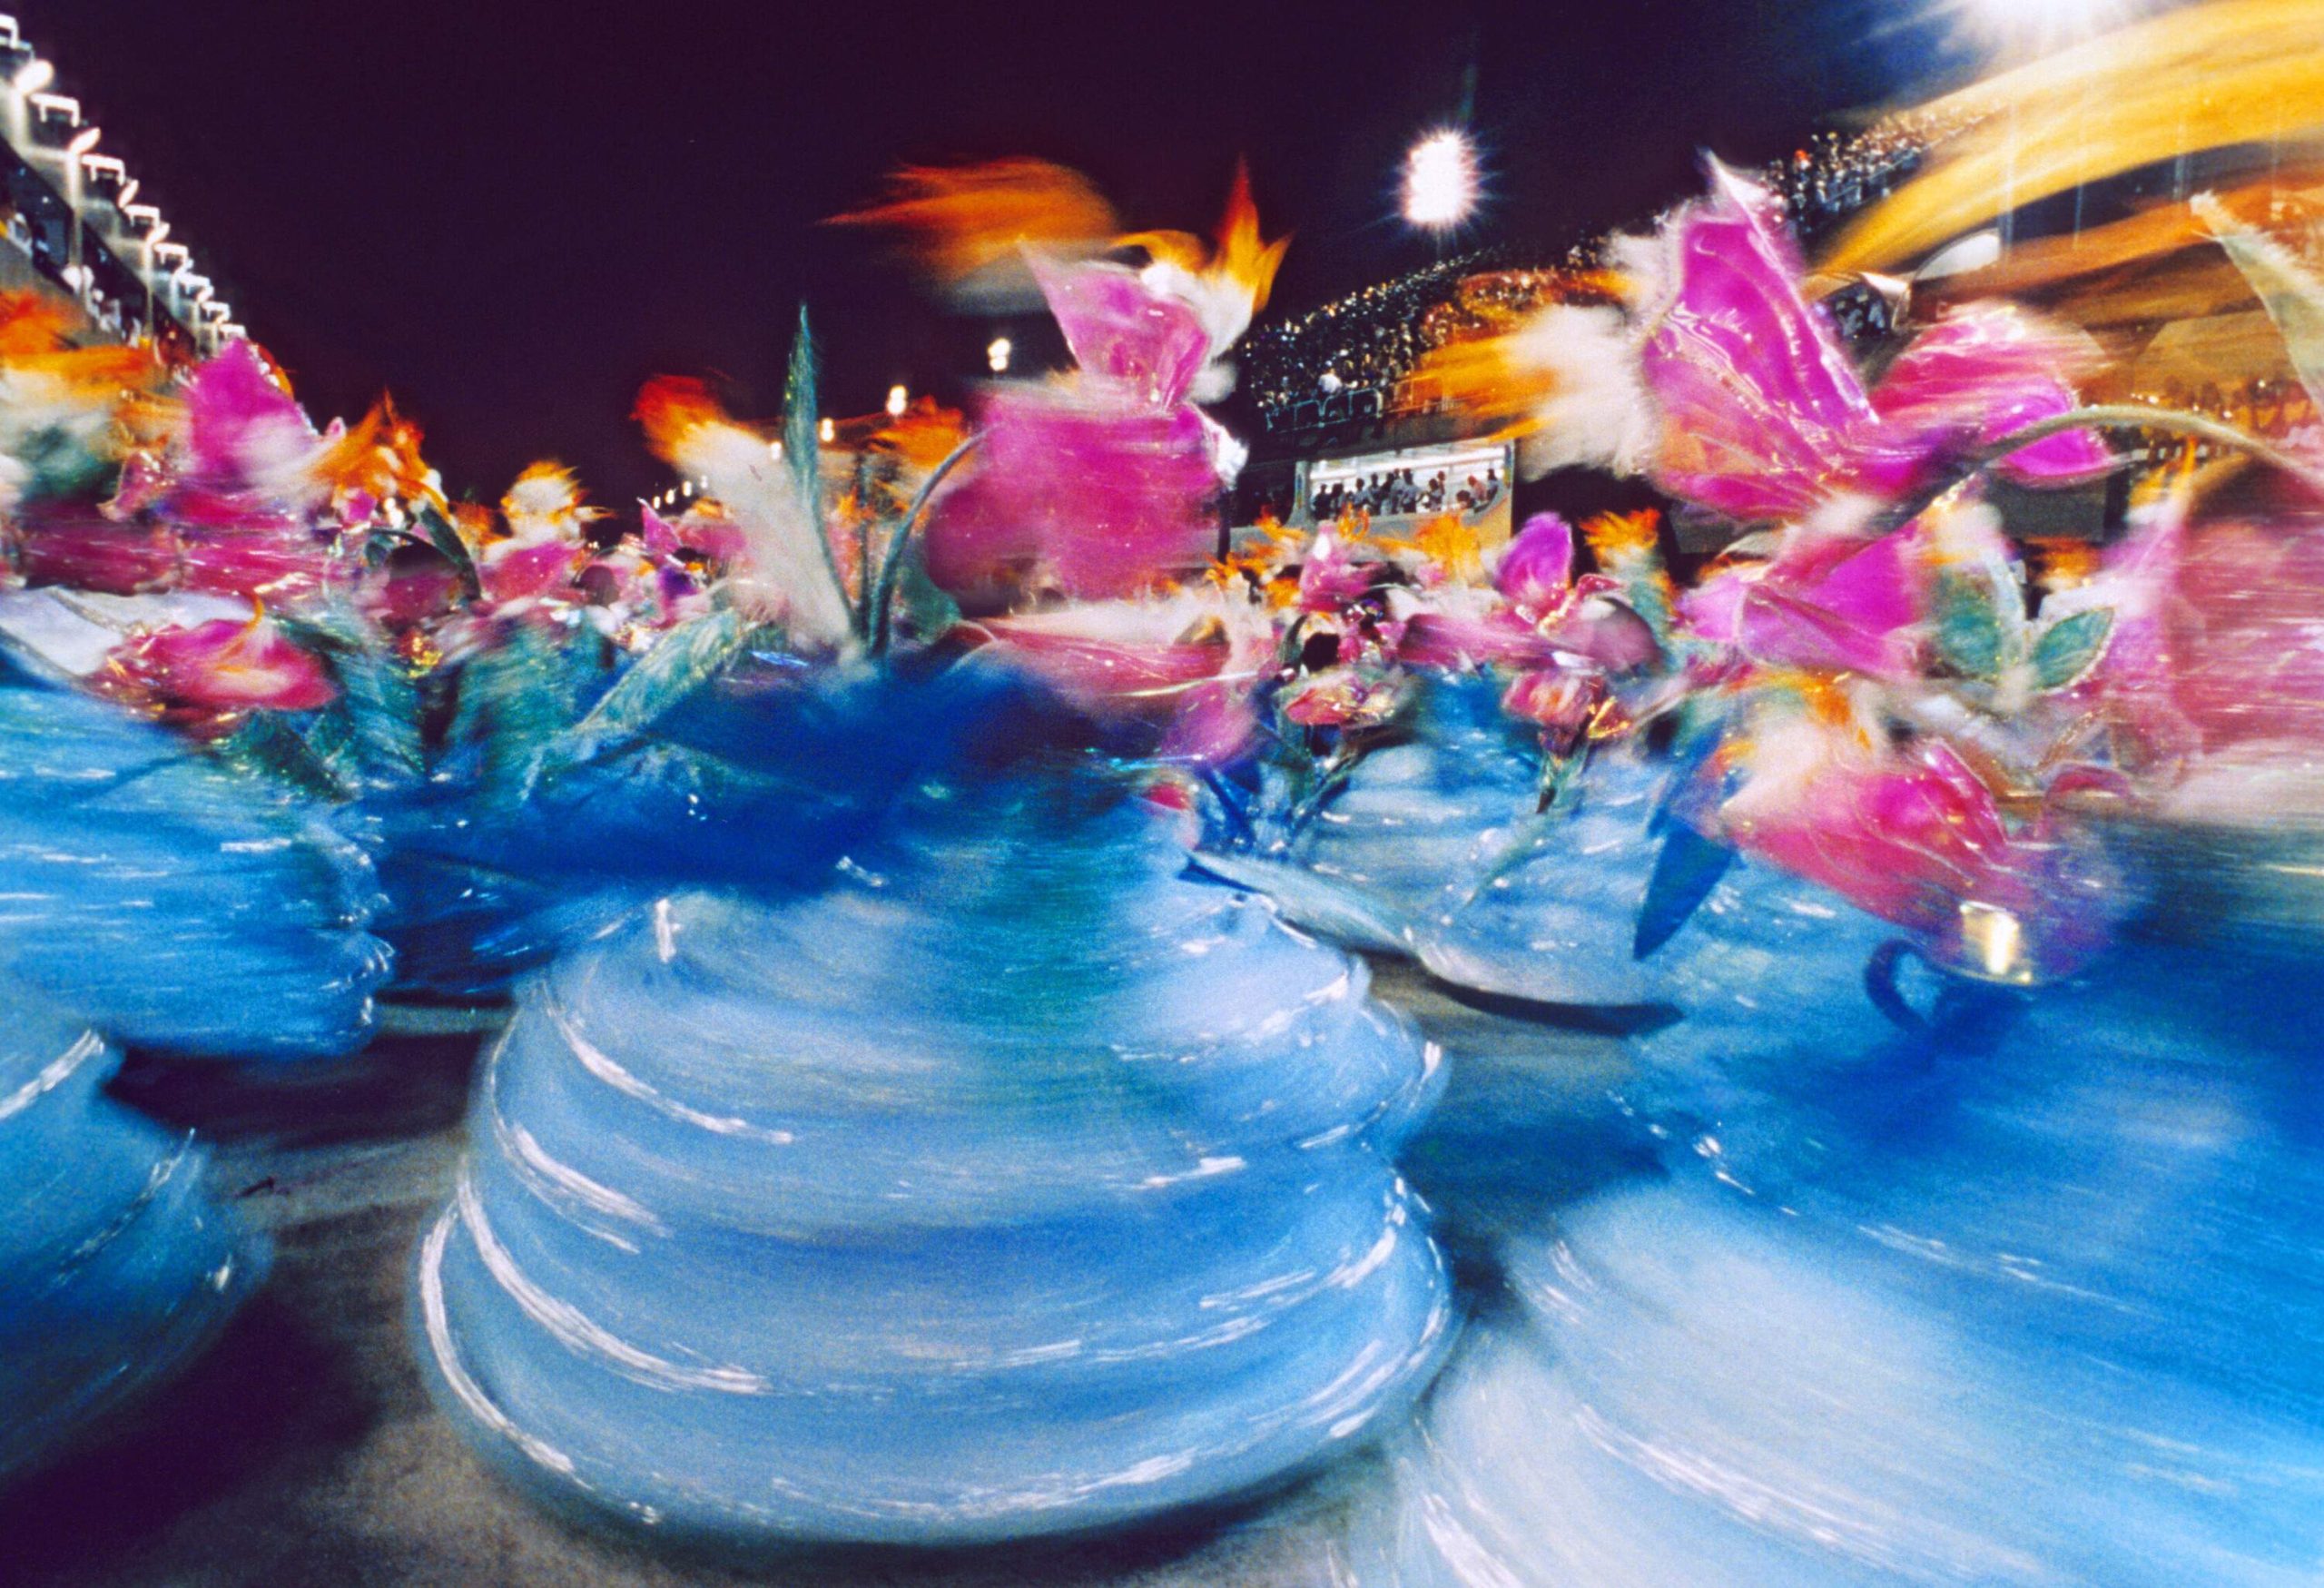 A blurry image of dancers in colourful traditional costumes dancing on the street.